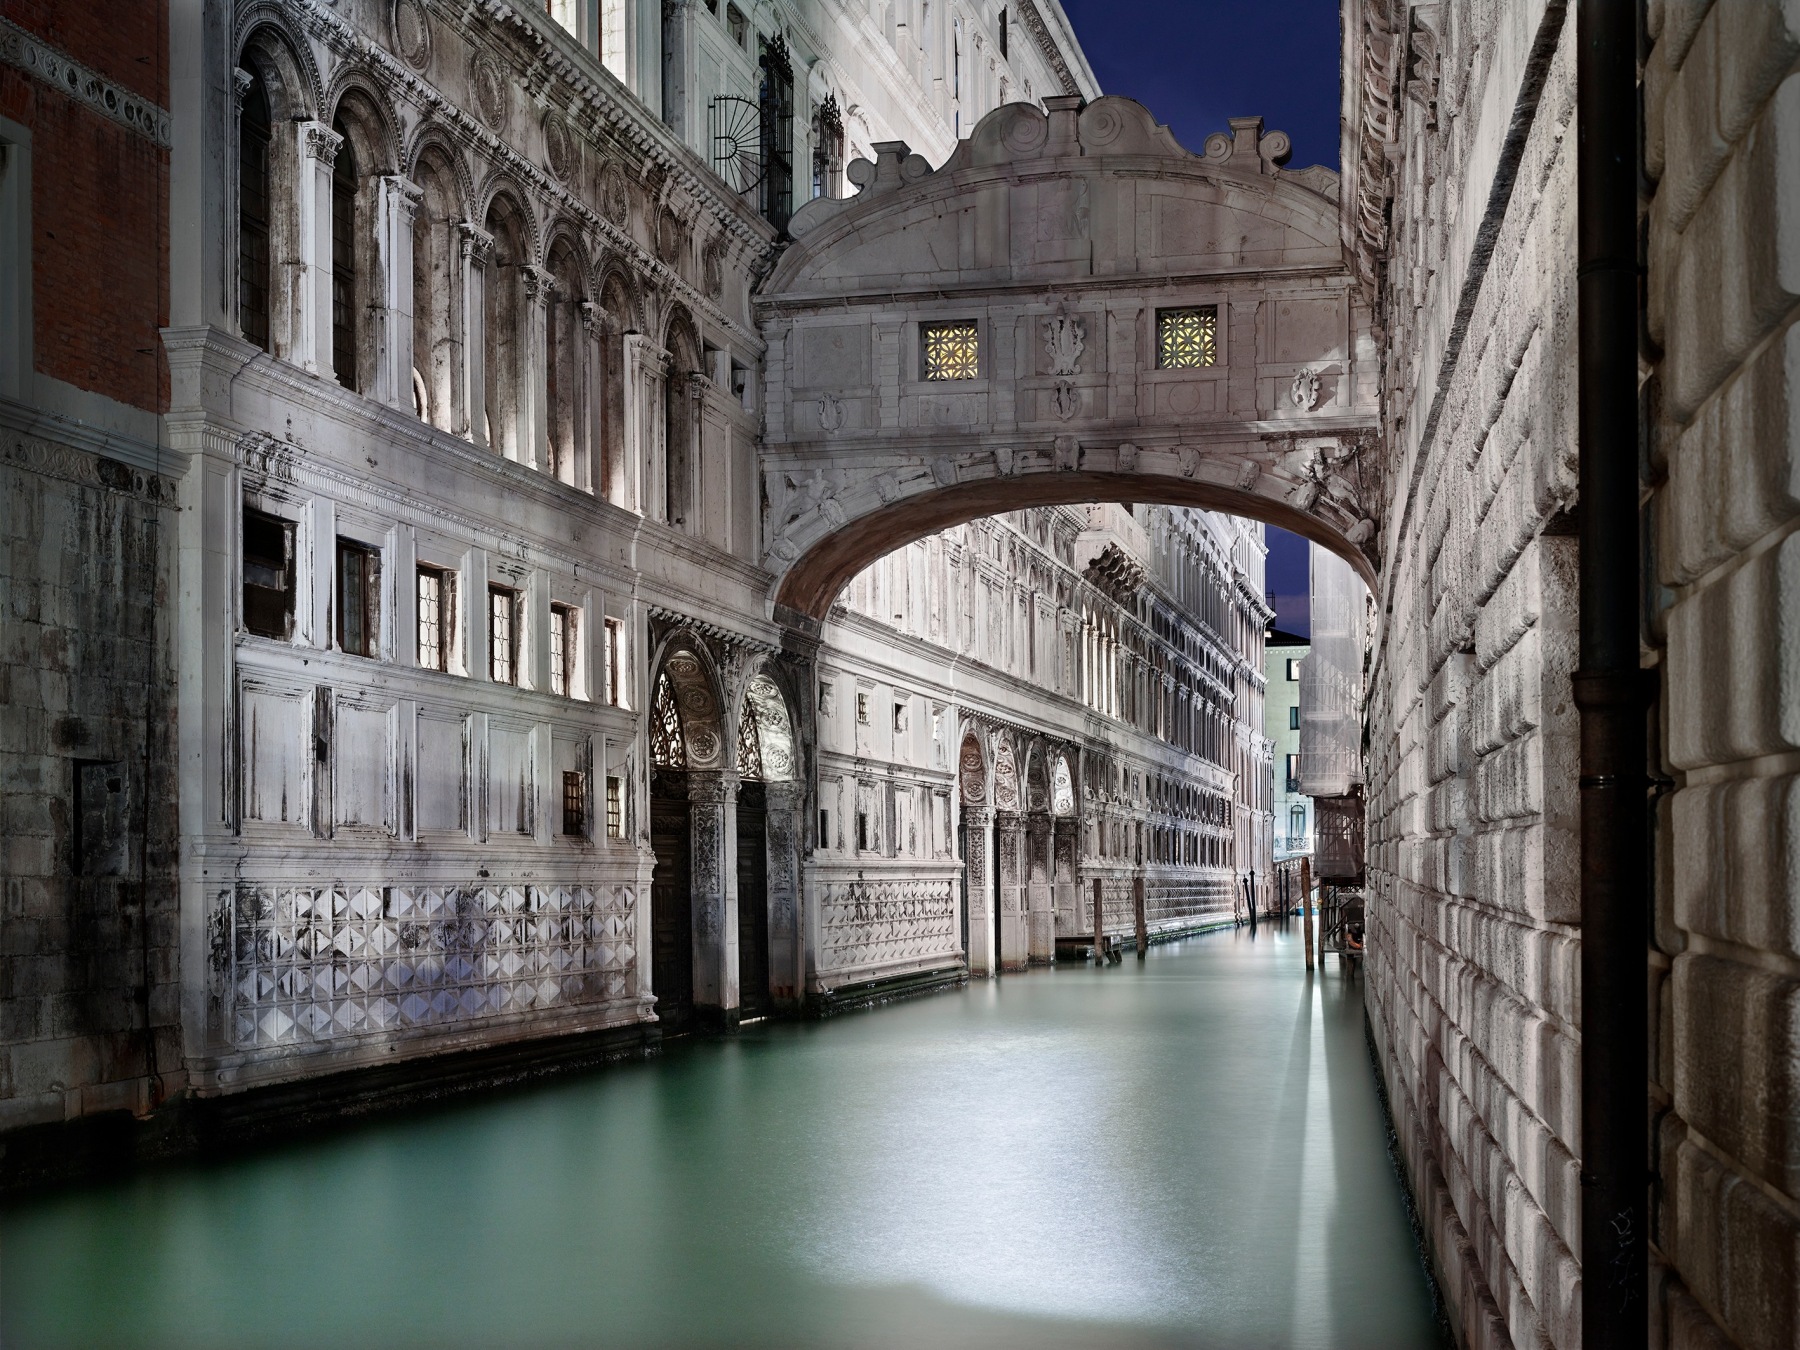 Night photo of a Venice canal with bridge crossing over.